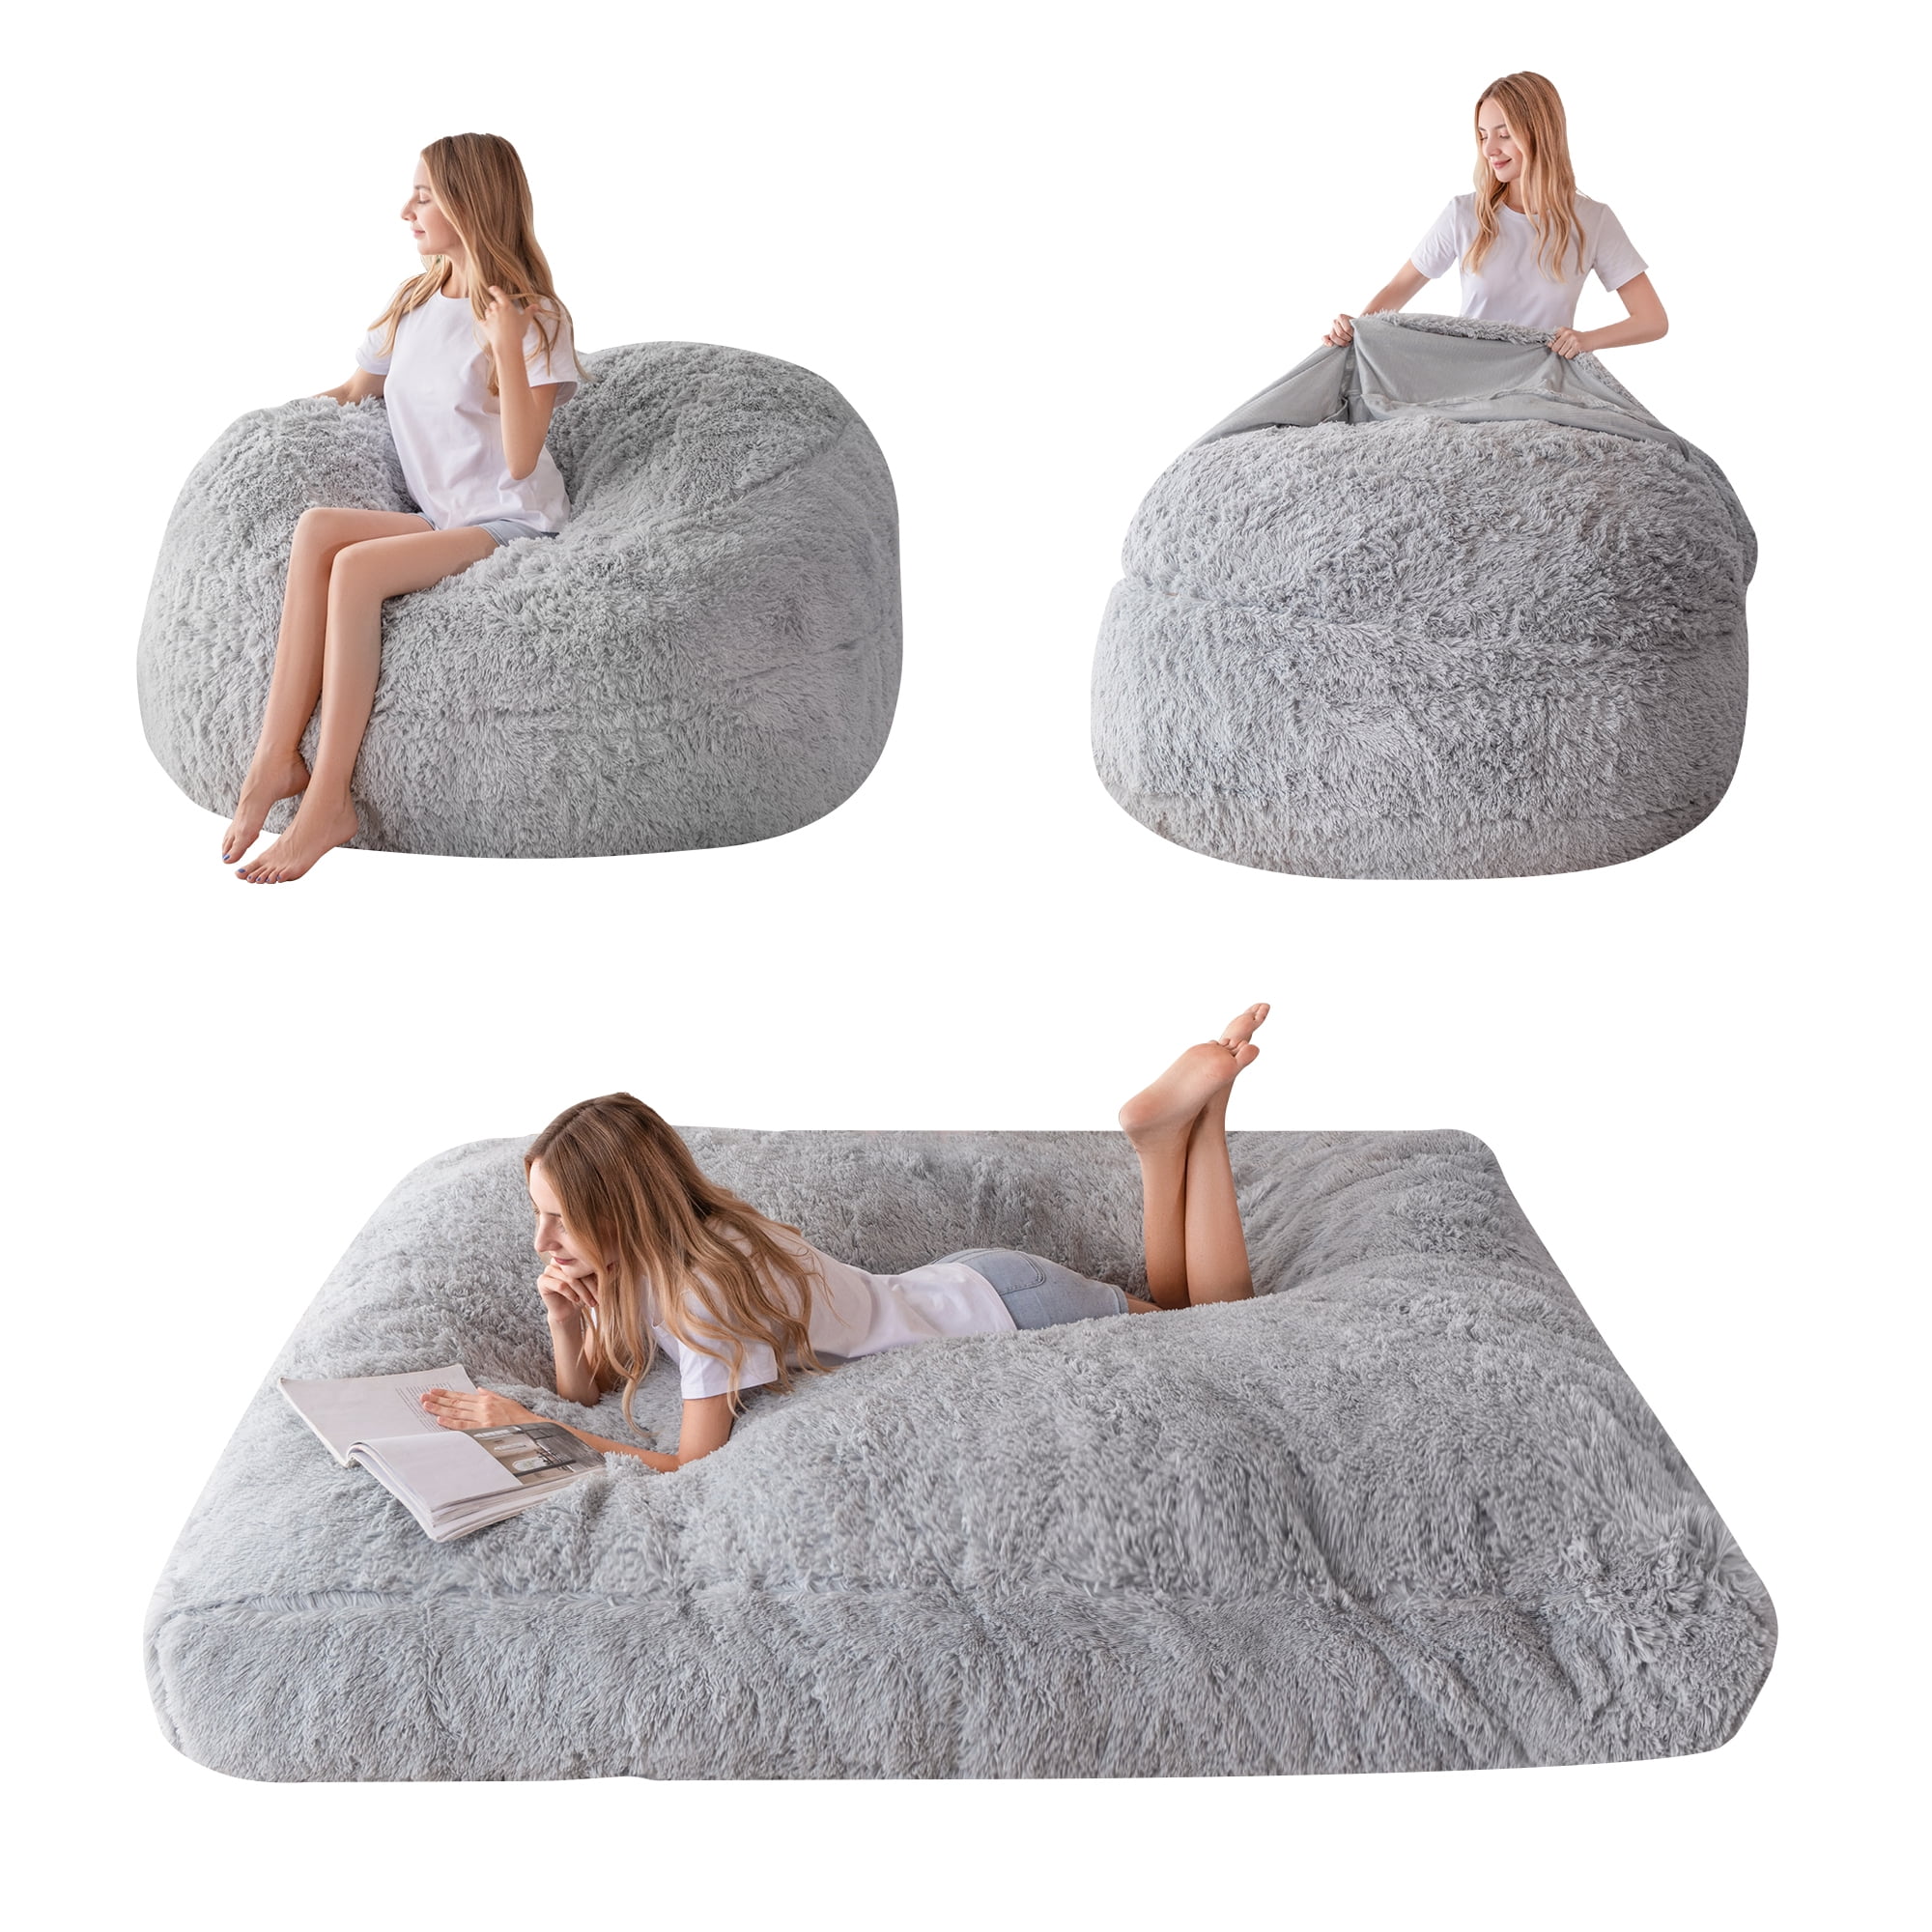 BYBYME Giant Bean Bag Chair Bed for Adults, Convertible Beanbag Folds ...